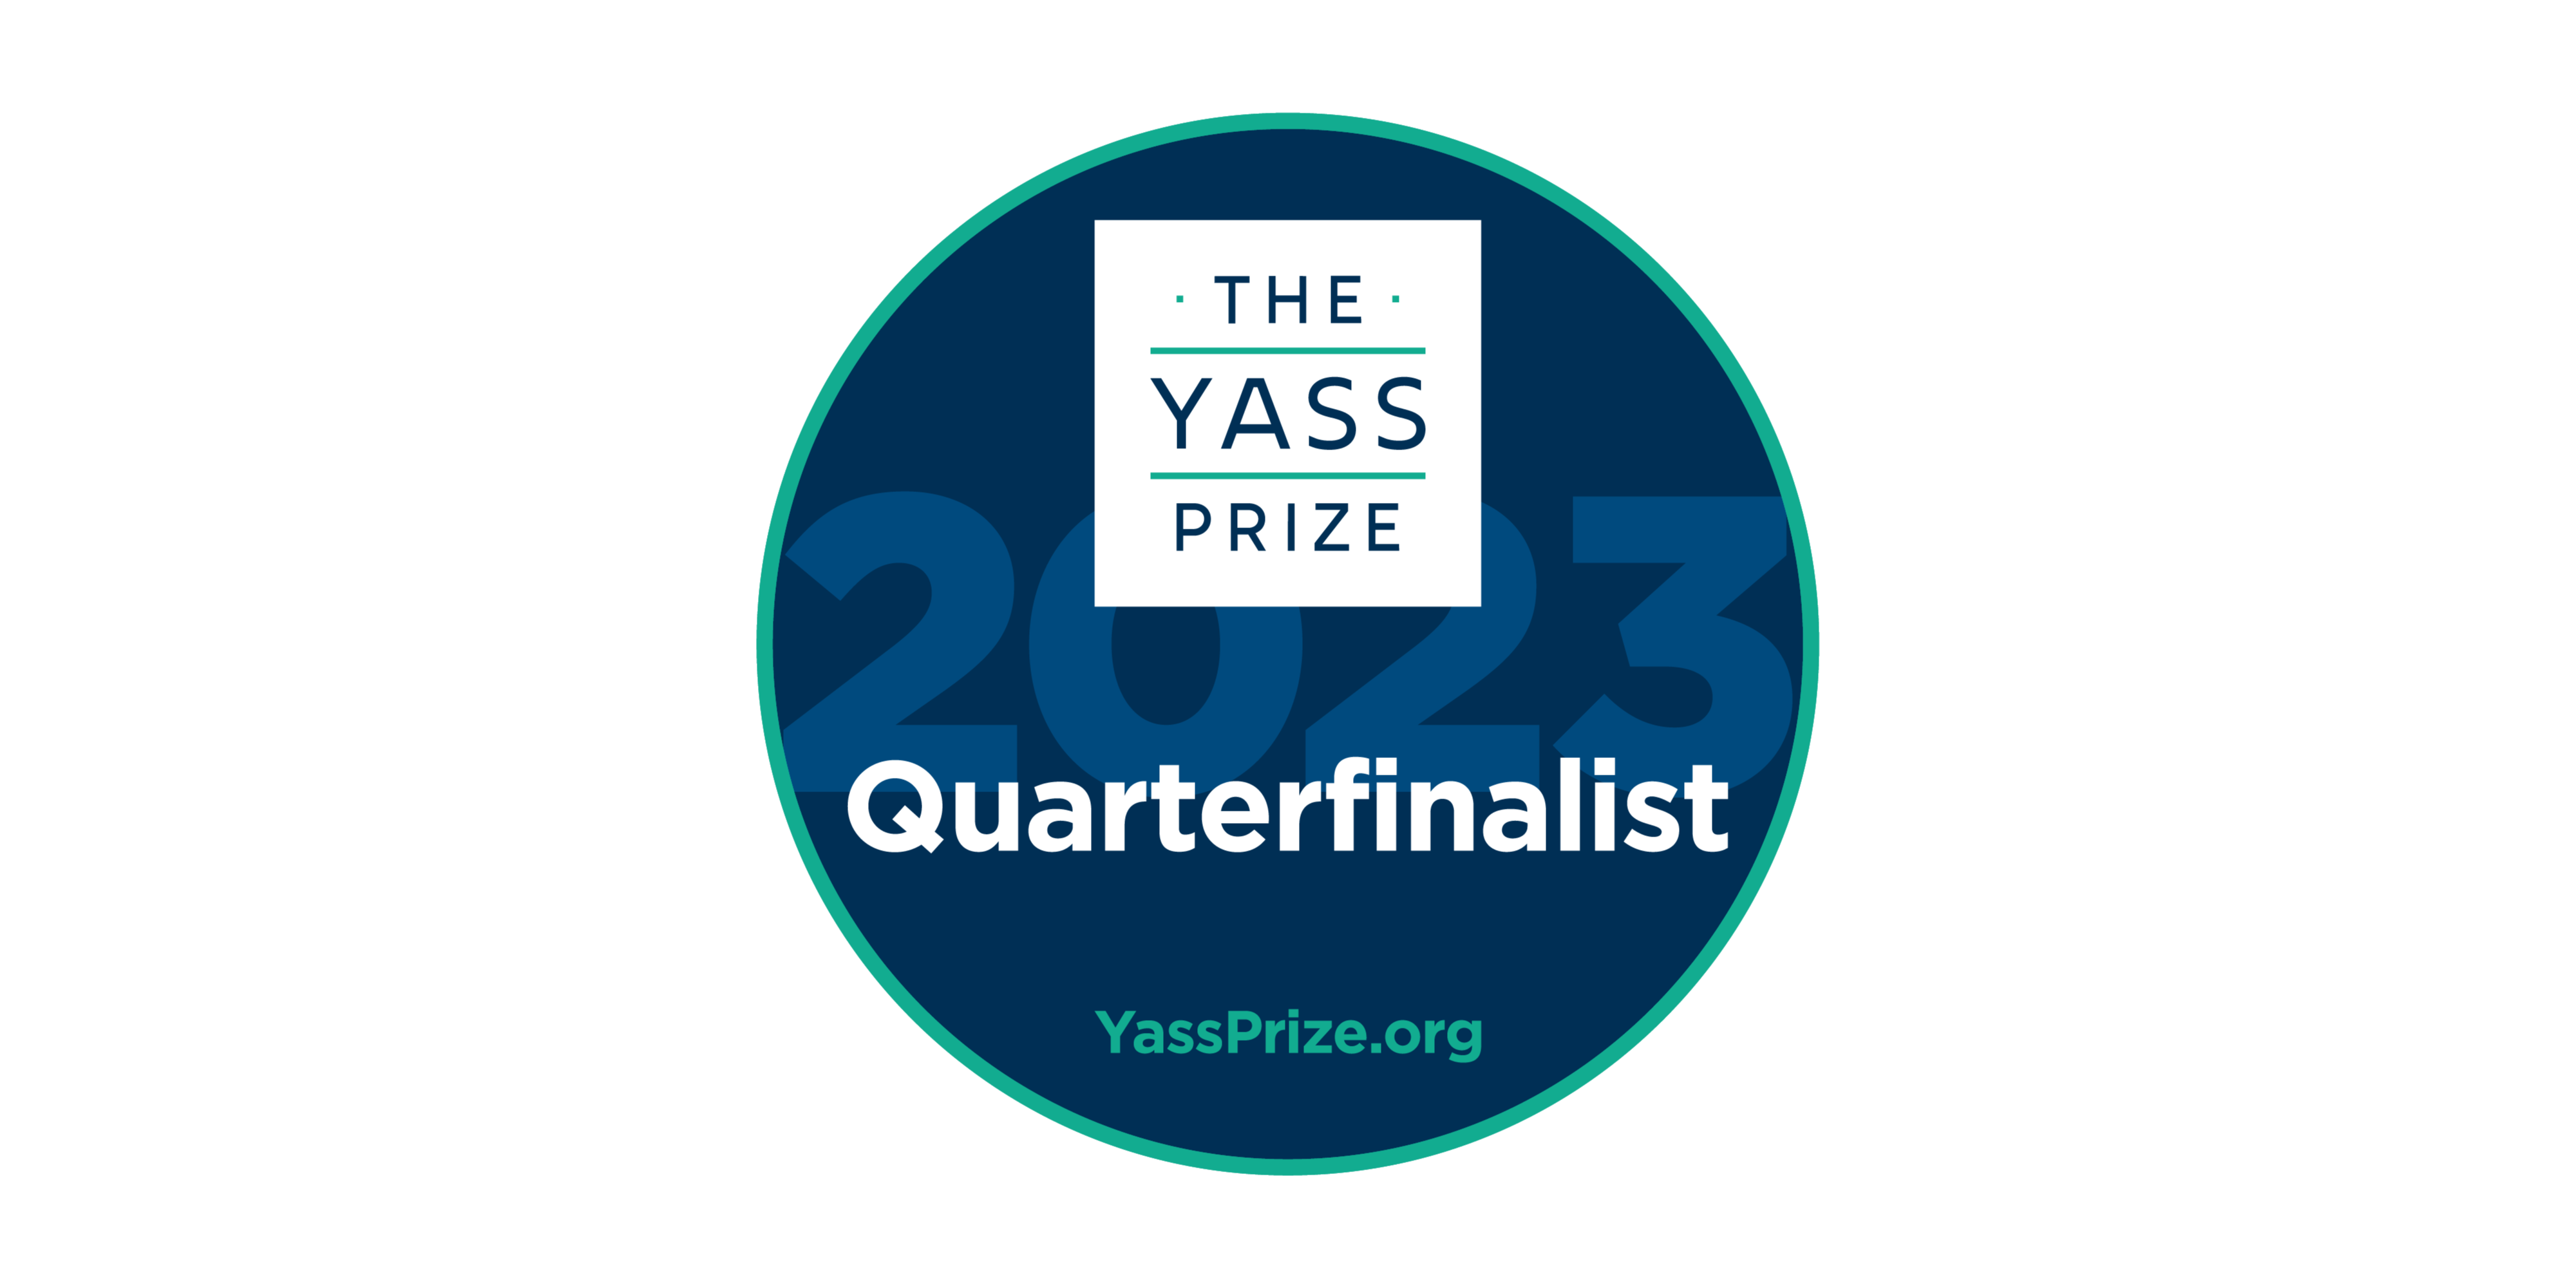 St. George MSU CTE/Makerspace Project is a Yass Prize Quarterfinalist for 2023